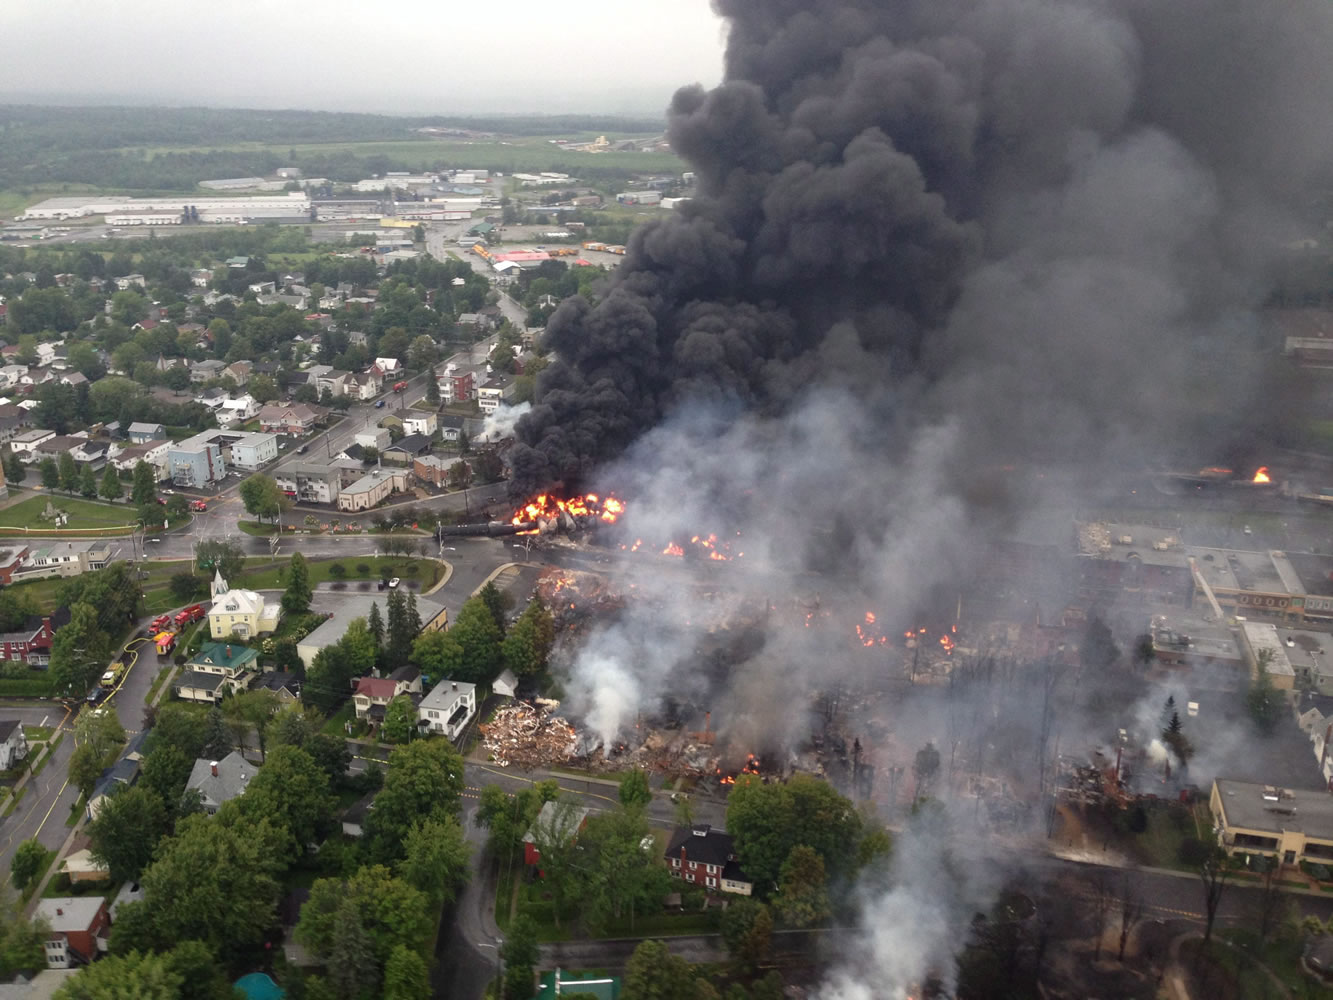 Fires burn in the town of Lac-Megantic, Quebec, on July 6, following an oil-train derailment. The accident spurred the U.S.